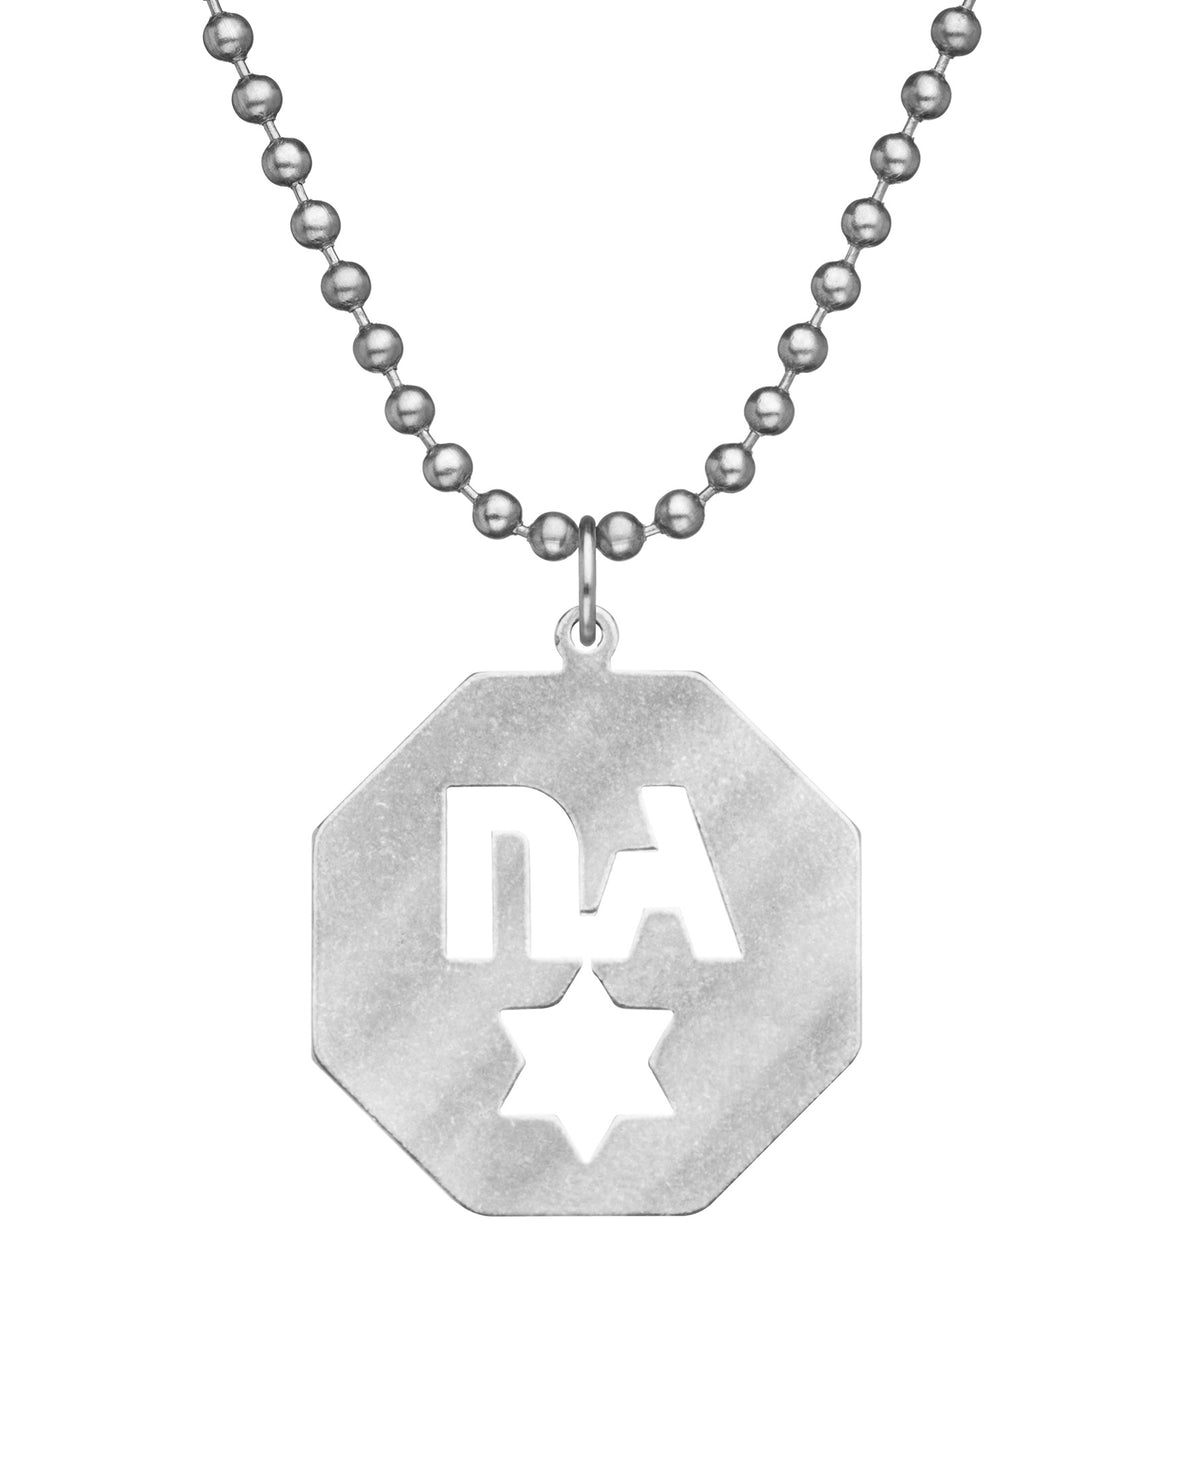 Genuine U.S. Military Issue Never Again Star Necklace with Dog Tag Chain